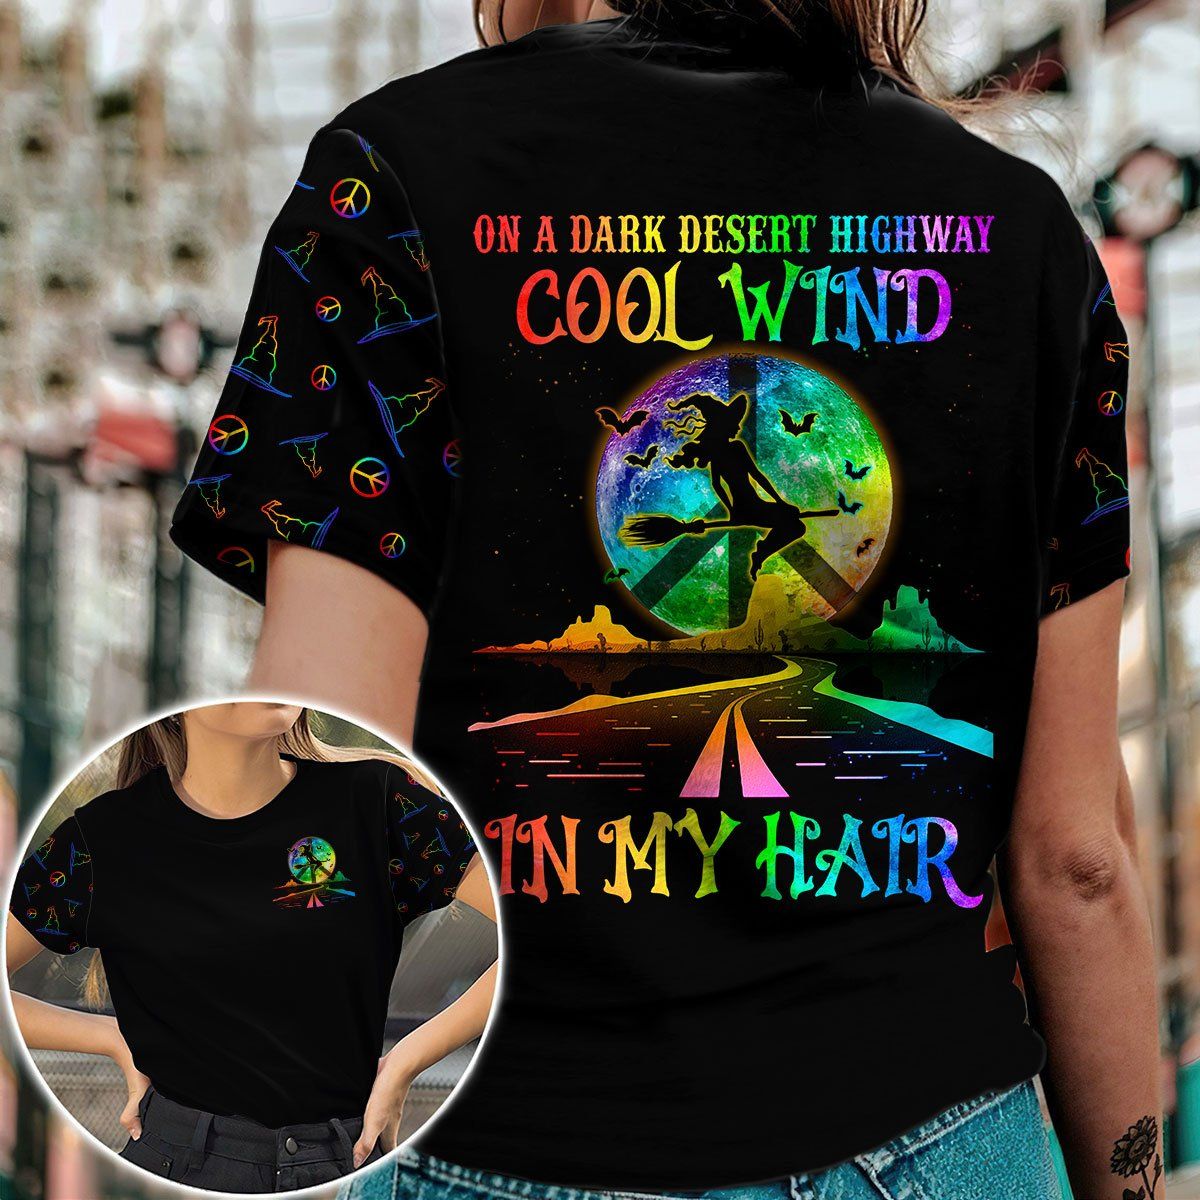 Witch Hippie Colorful 3D T-shirt On A Dark Desert Highway Cool Wind In My Hair